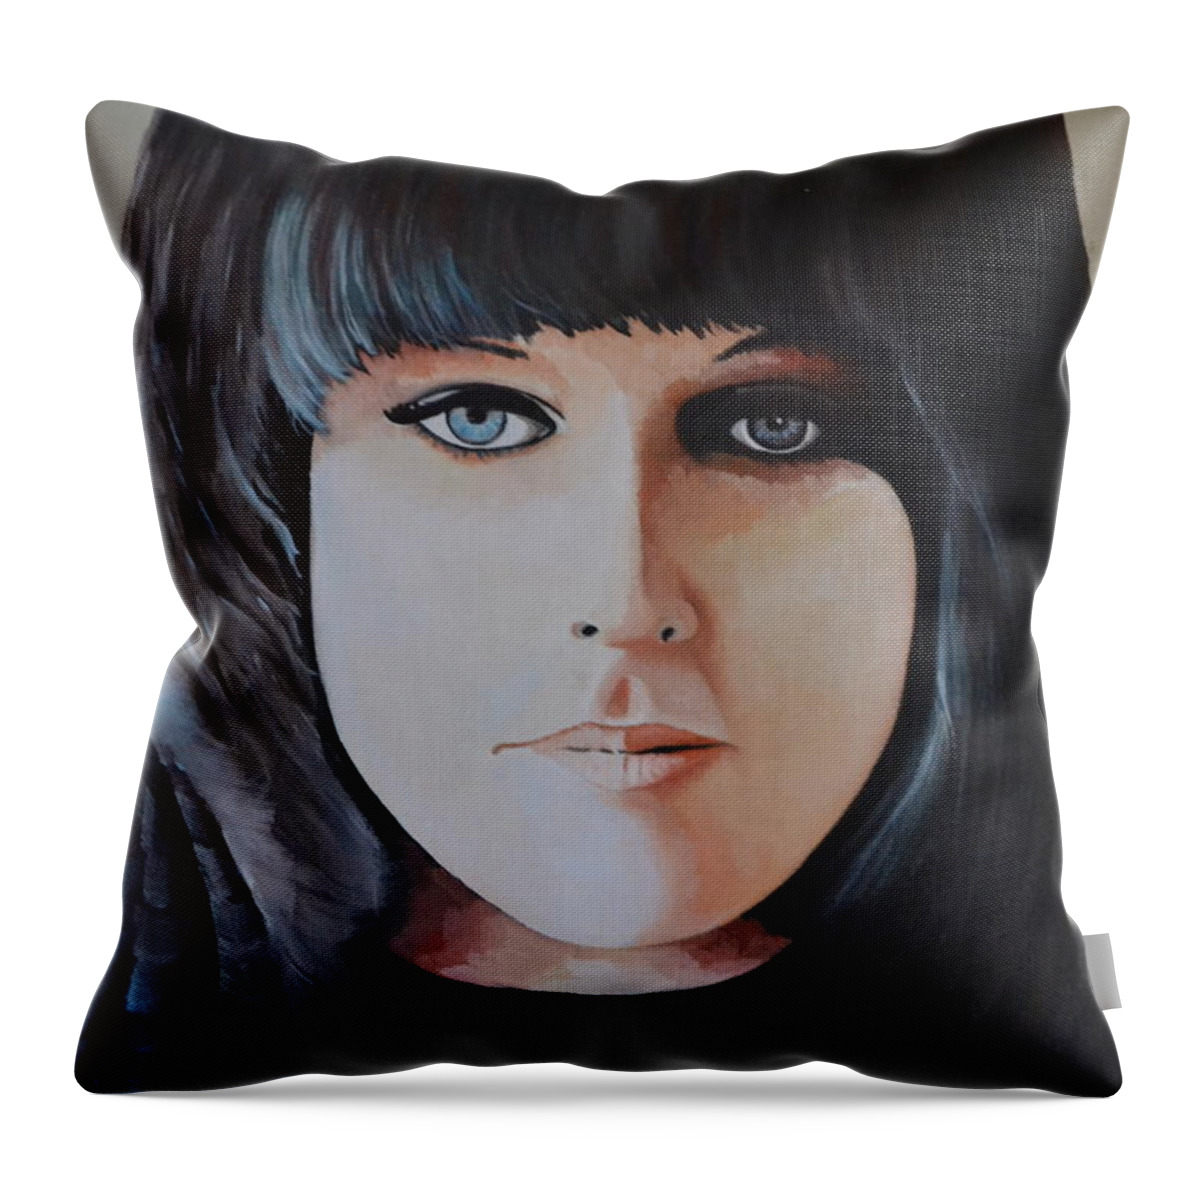 A Portrait Of Grace Slick The Lead Singer For The Jefferson Airplane. Throw Pillow featuring the painting Grace Slick by Martin Schmidt